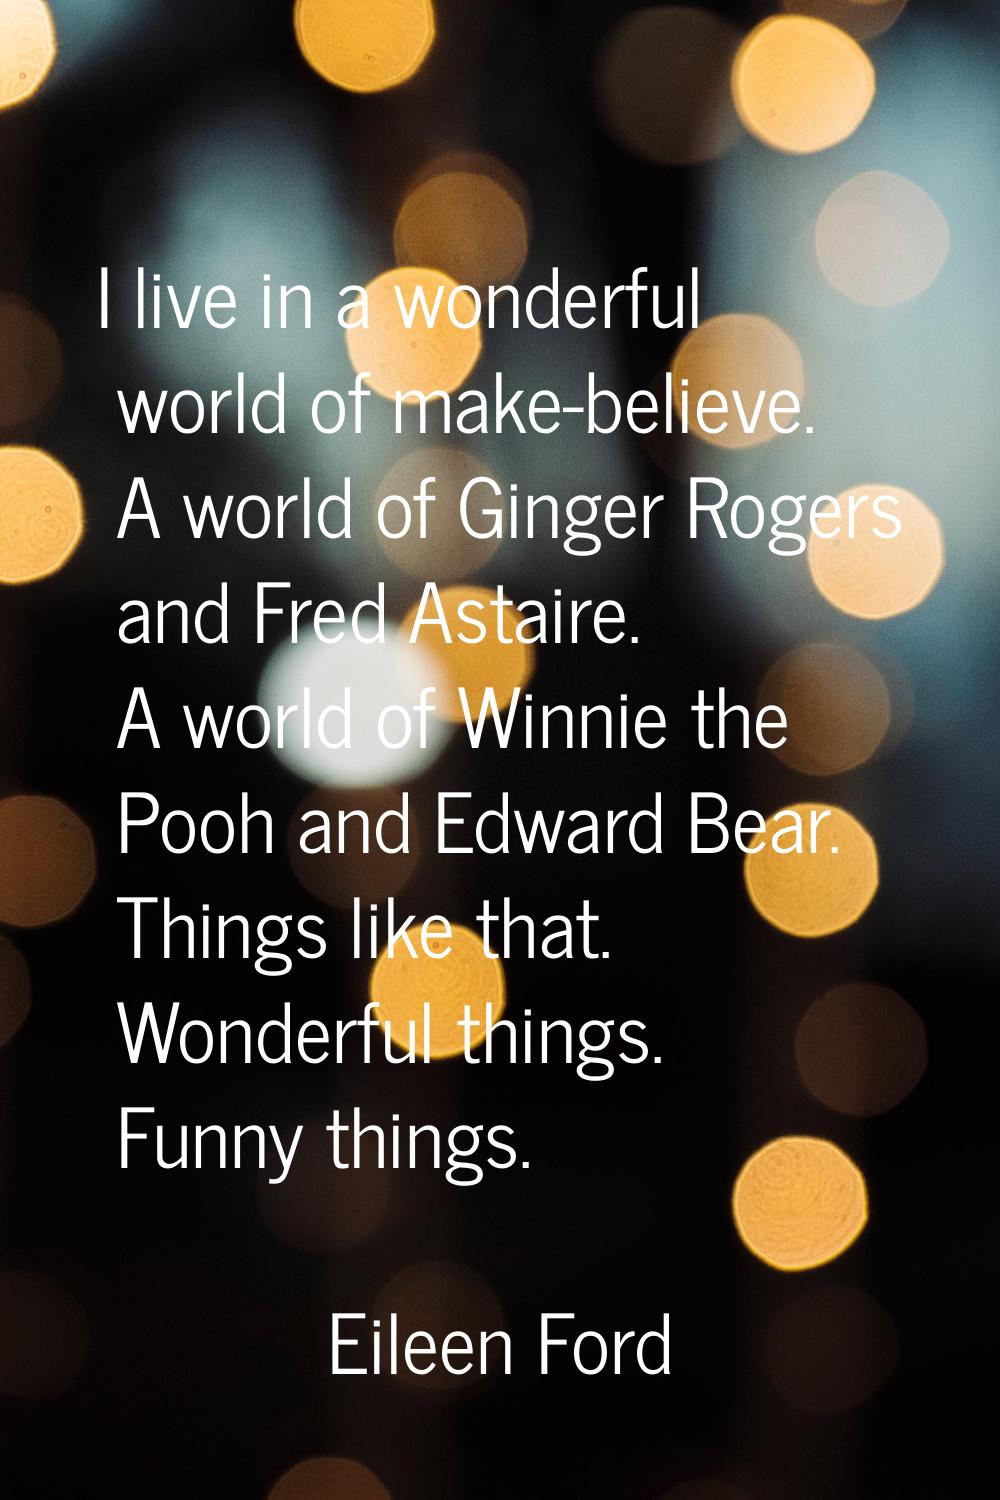 I live in a wonderful world of make-believe. A world of Ginger Rogers and Fred Astaire. A world of 